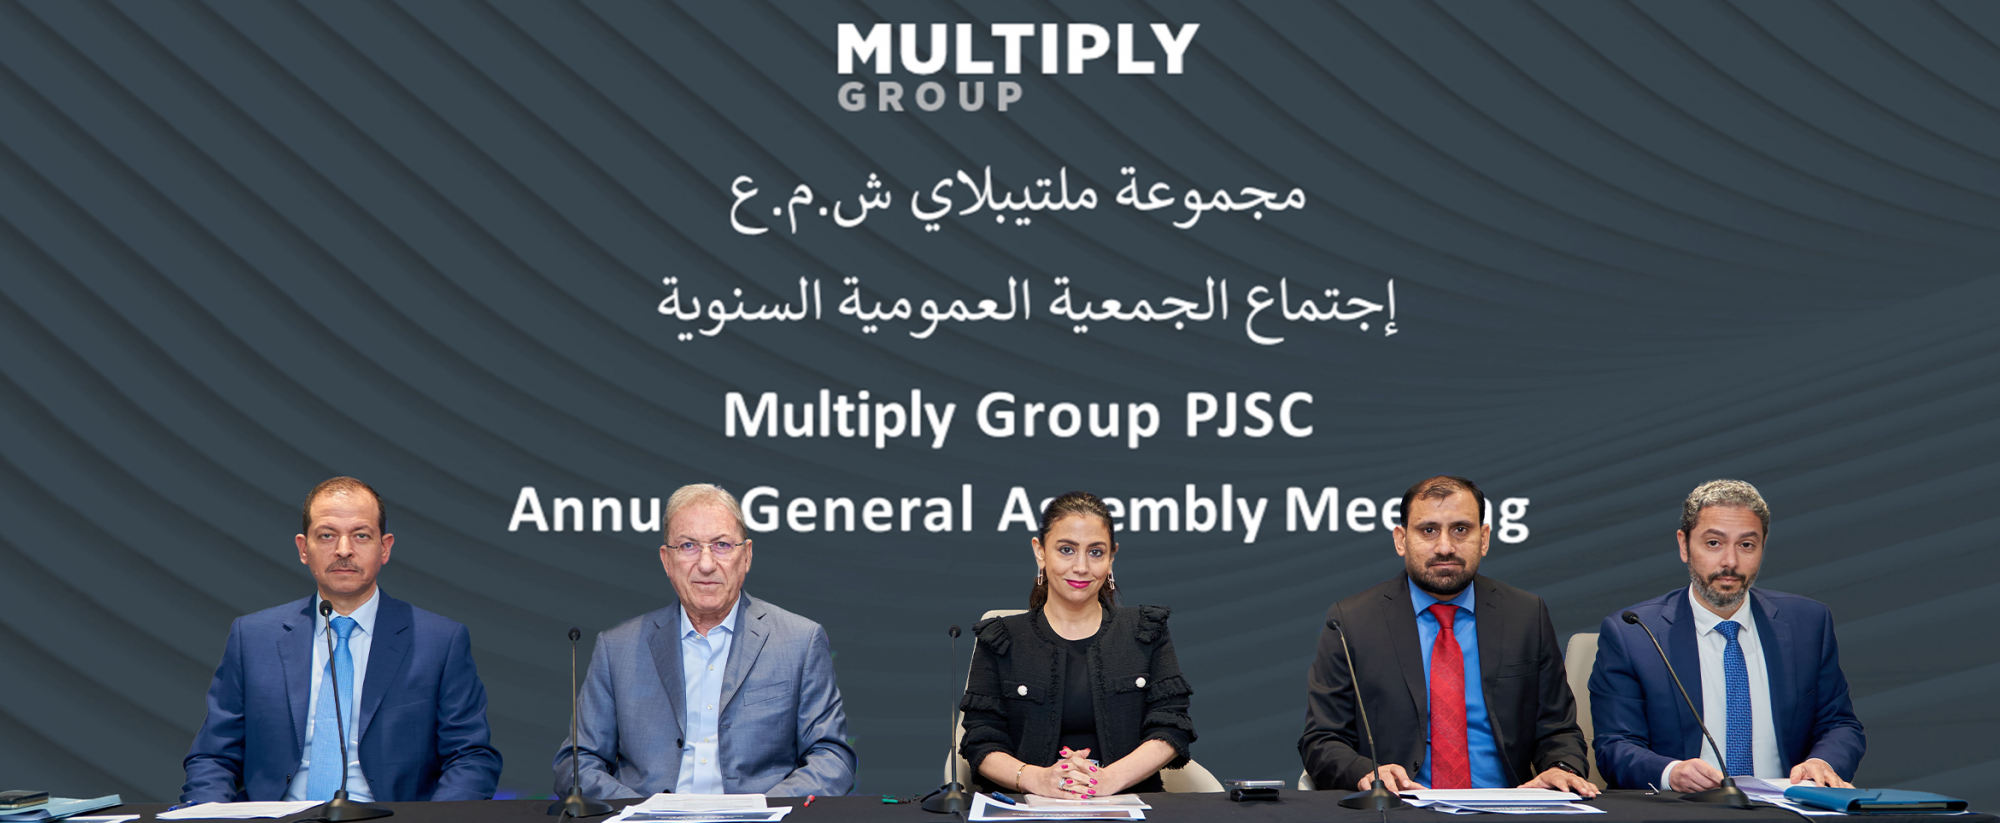 Multiply Group reflects on strong growth momentum and positive impact from its investments at General Assembly Meeting